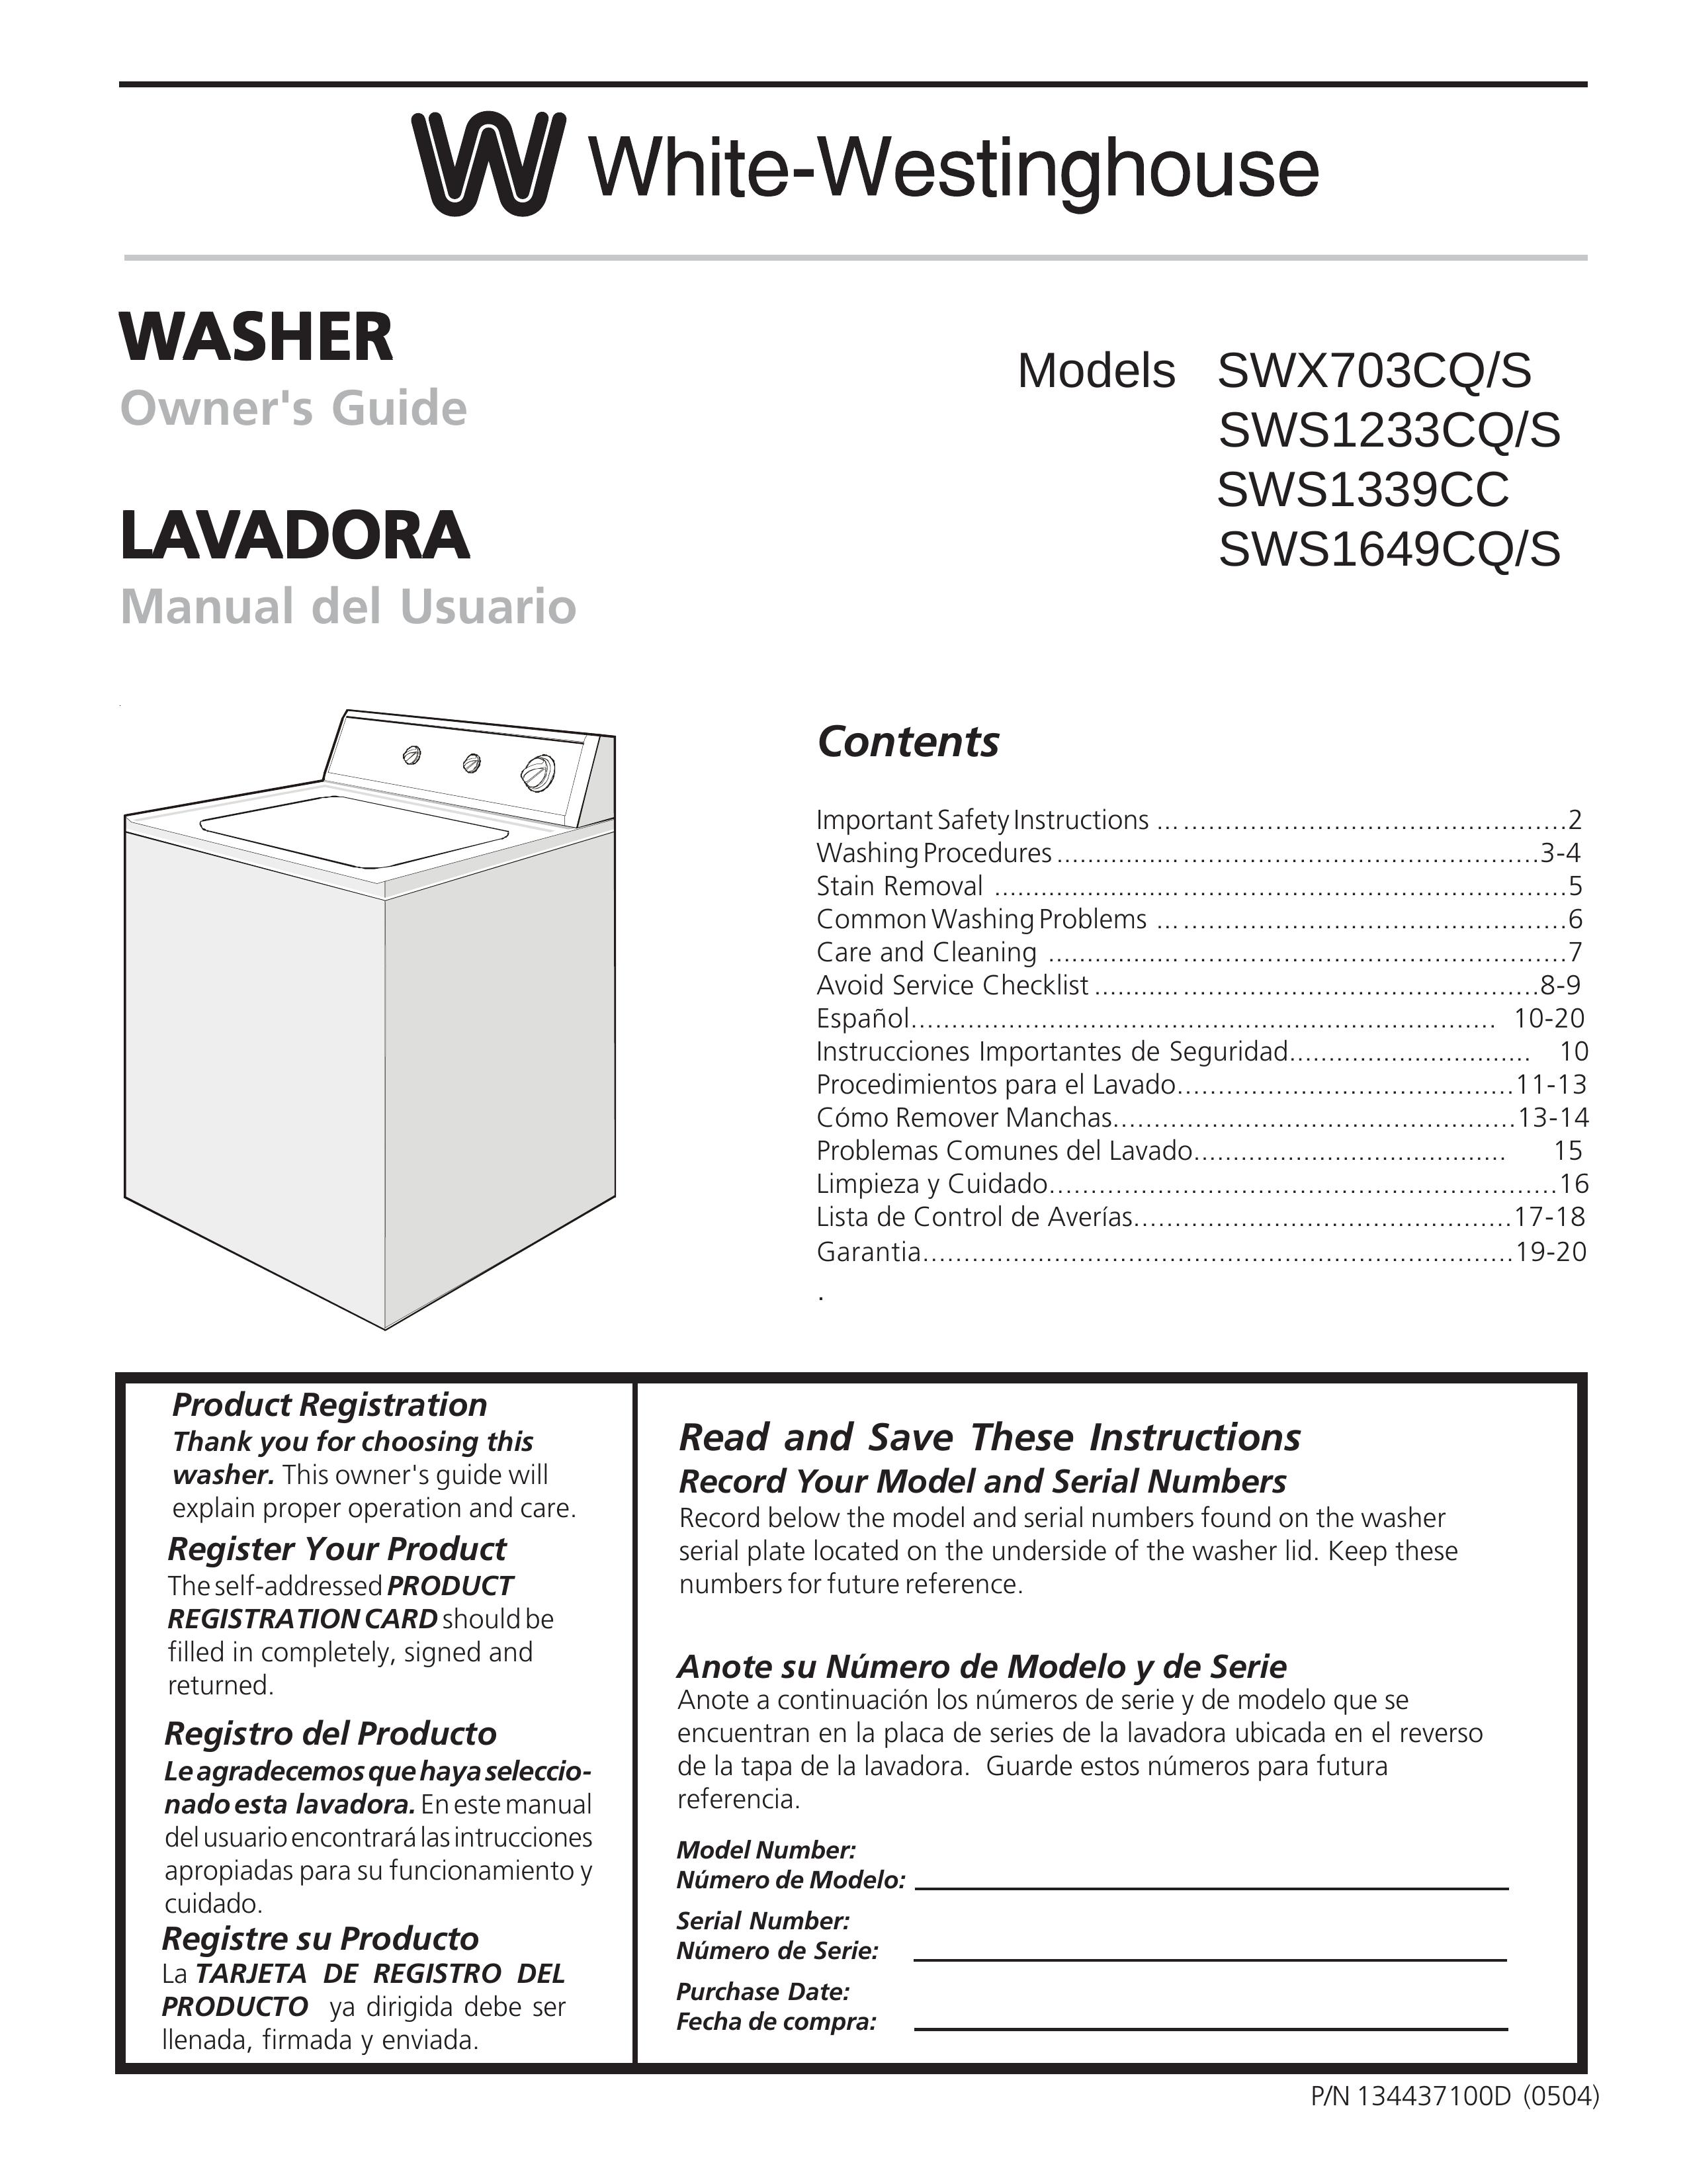 White-Westinghouse SWX703CQ/S Washer User Manual